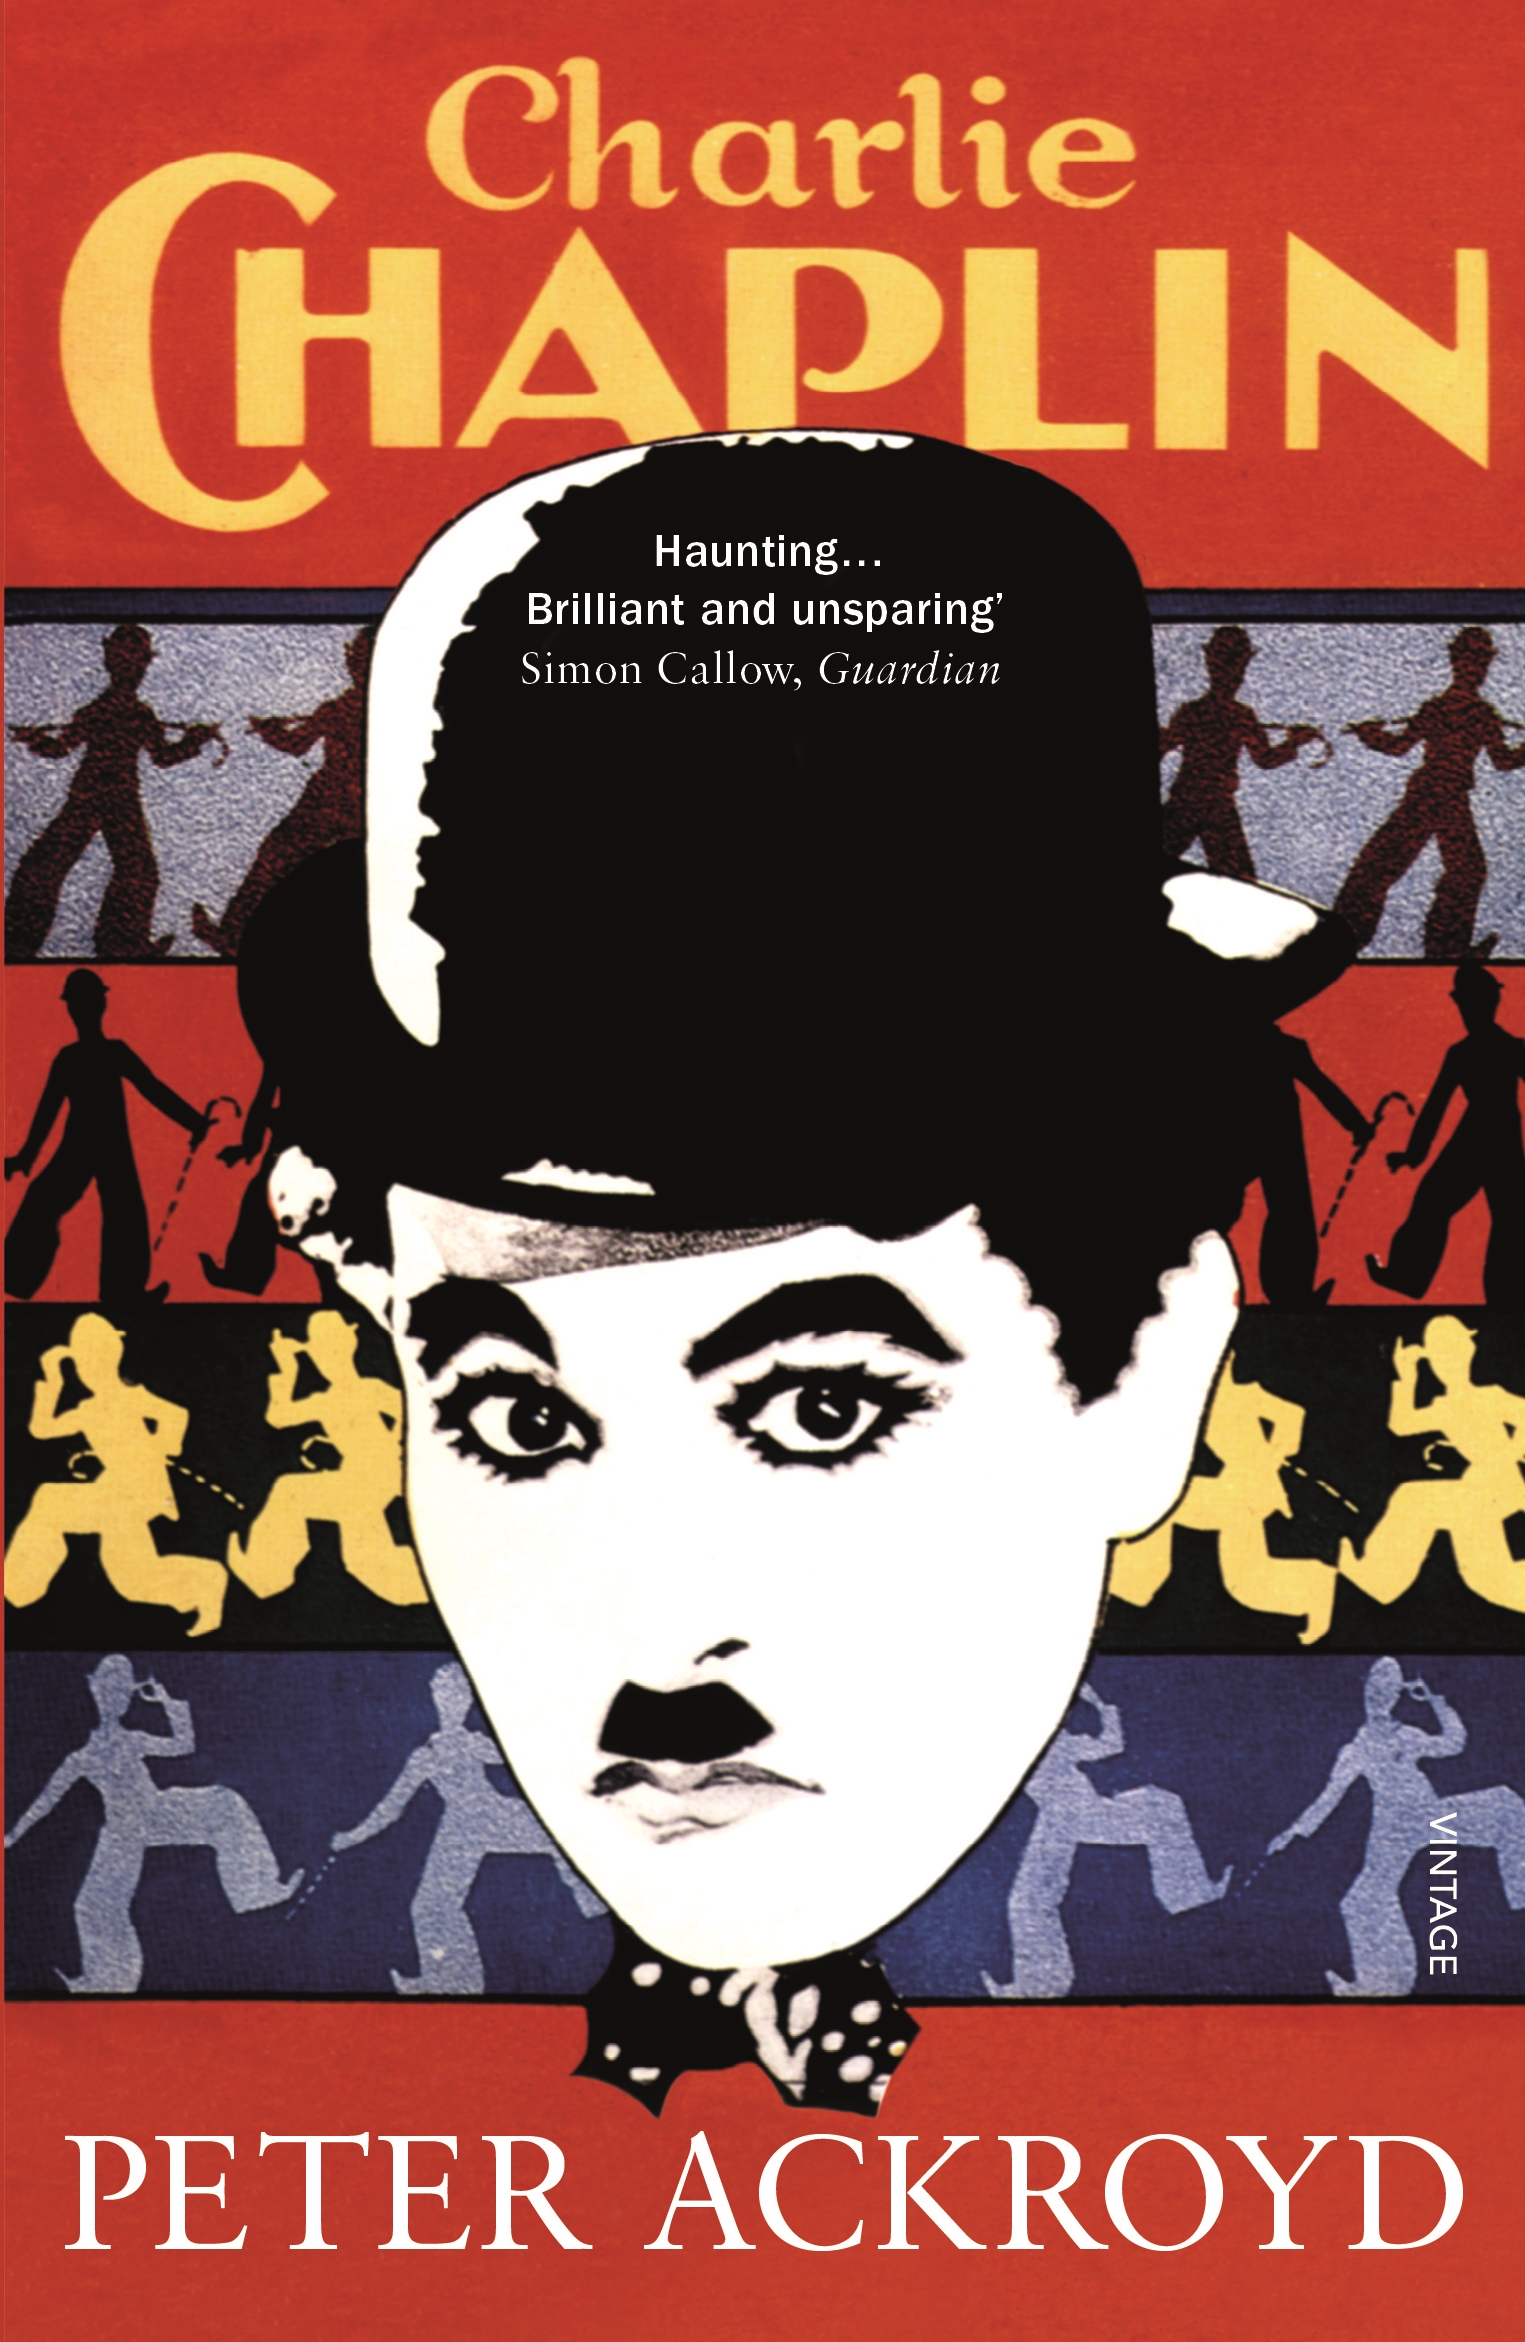 biography about charlie chaplin